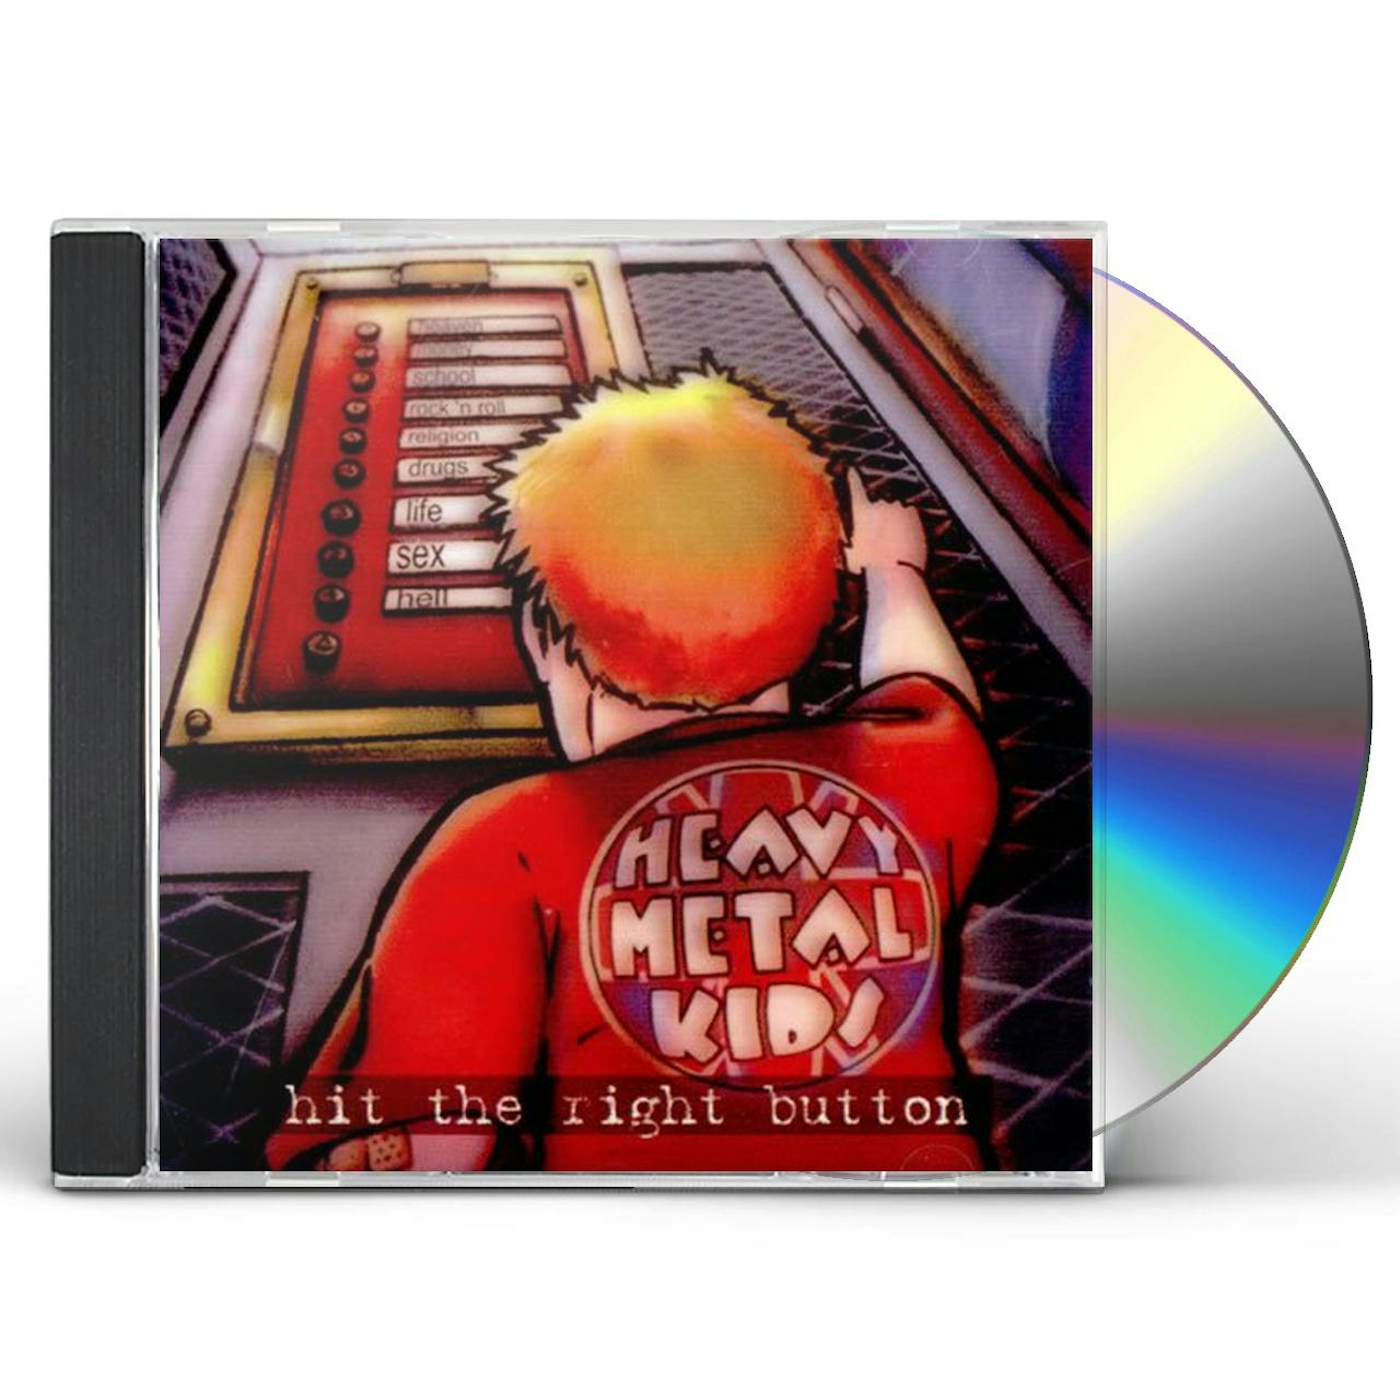 Heavy Metal Kids HIT THE RIGHT BUTTON CD